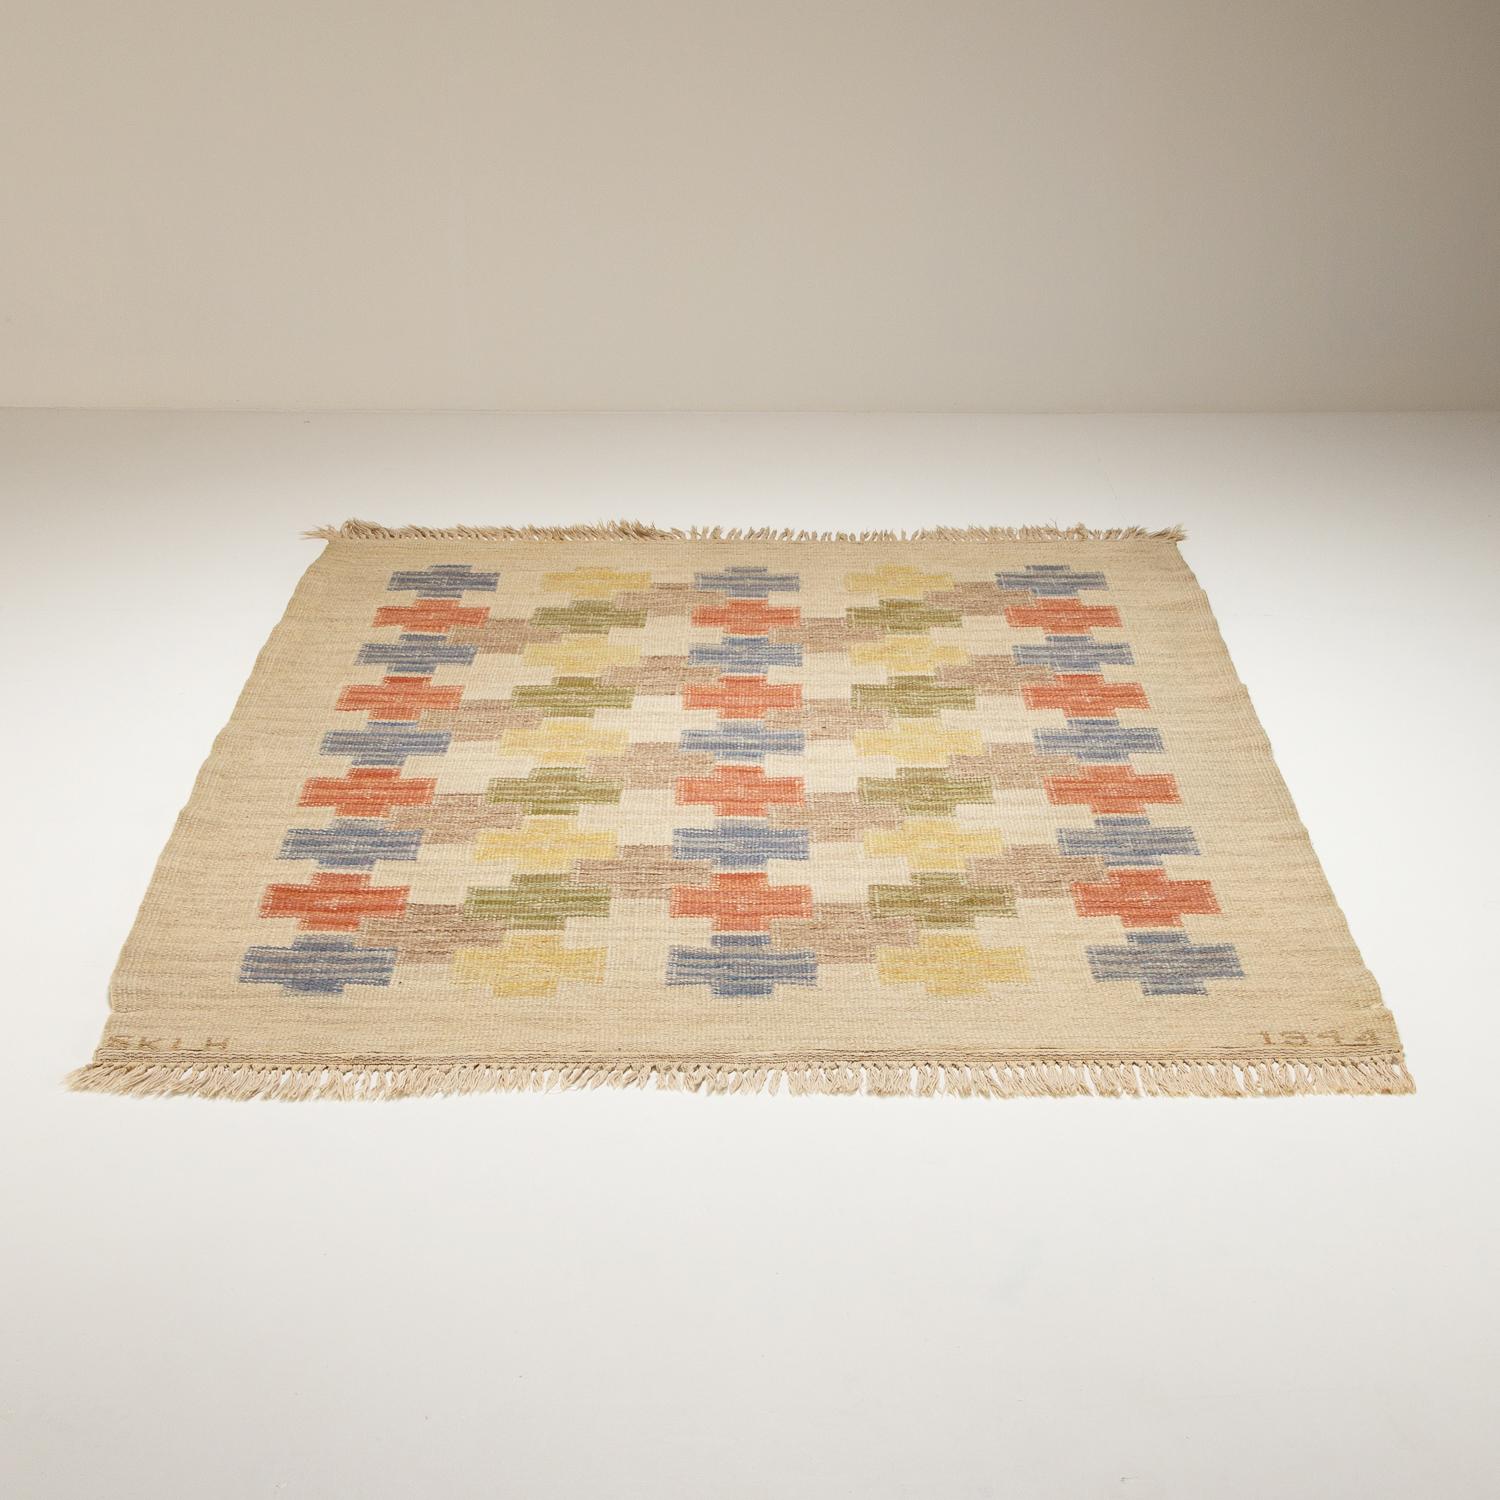 Mid-Century Modern ‘Summer’ Flat Weave Rug by Age Faith-Ell for SKLH, Sweden, 1944 For Sale